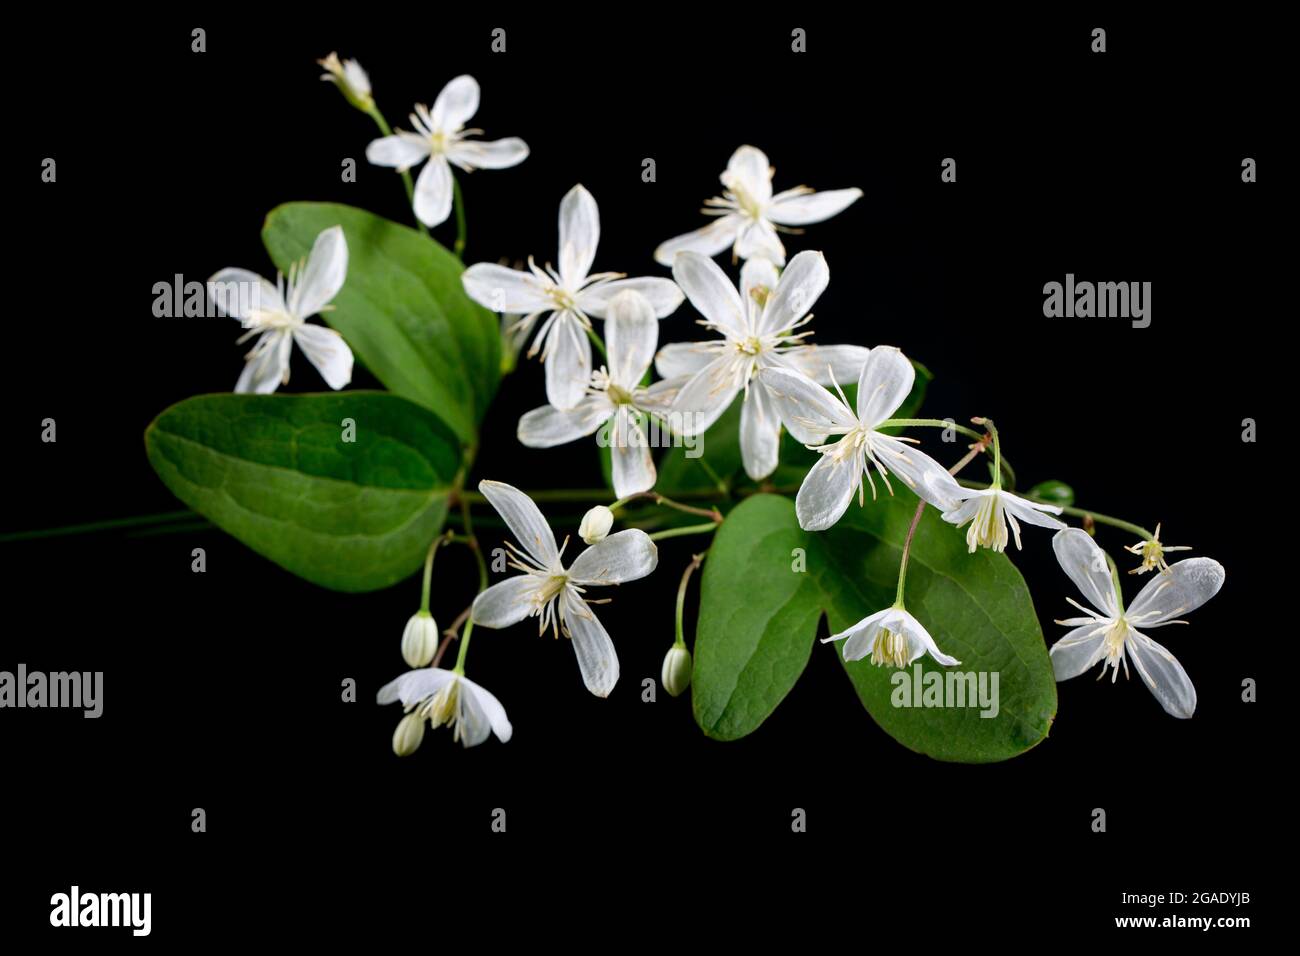 Blooming white clematis on black background. A minimalistic photo for a poster. Stock Photo